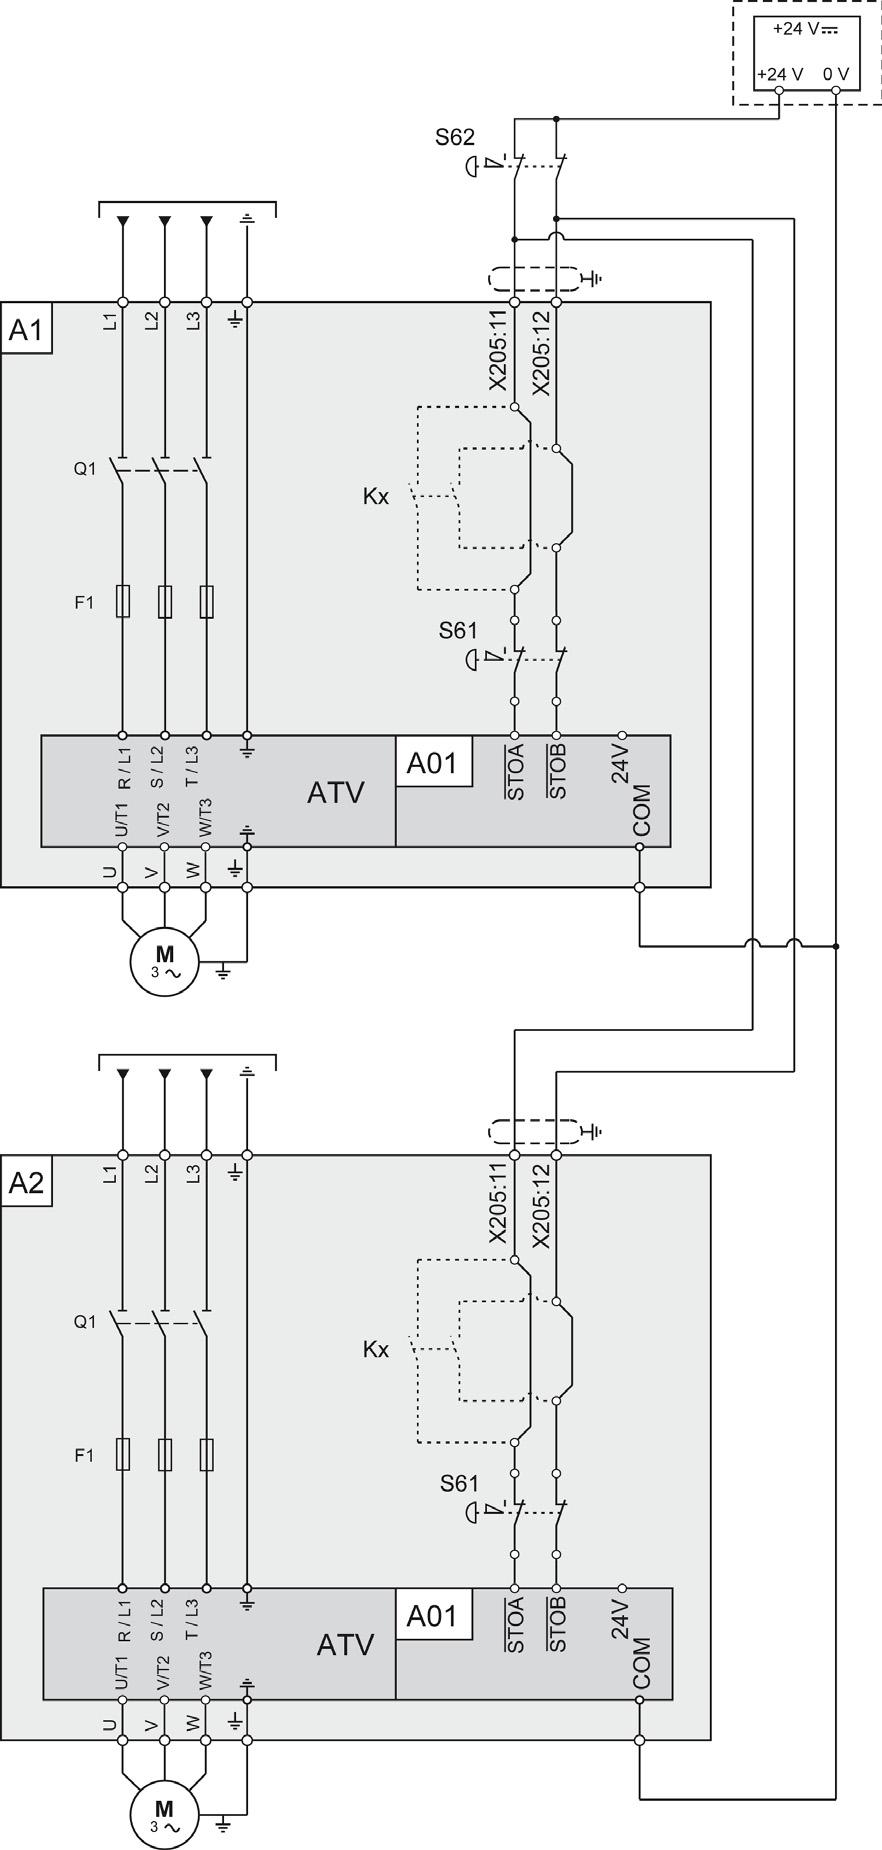 Multi drive Drive Systems Connection Diagram This connection diagram applies for multidrive Altivar Process Drive Systems configuration, with option VW3AP1502 (Safe Torque Off STO - SIL 3 Stop